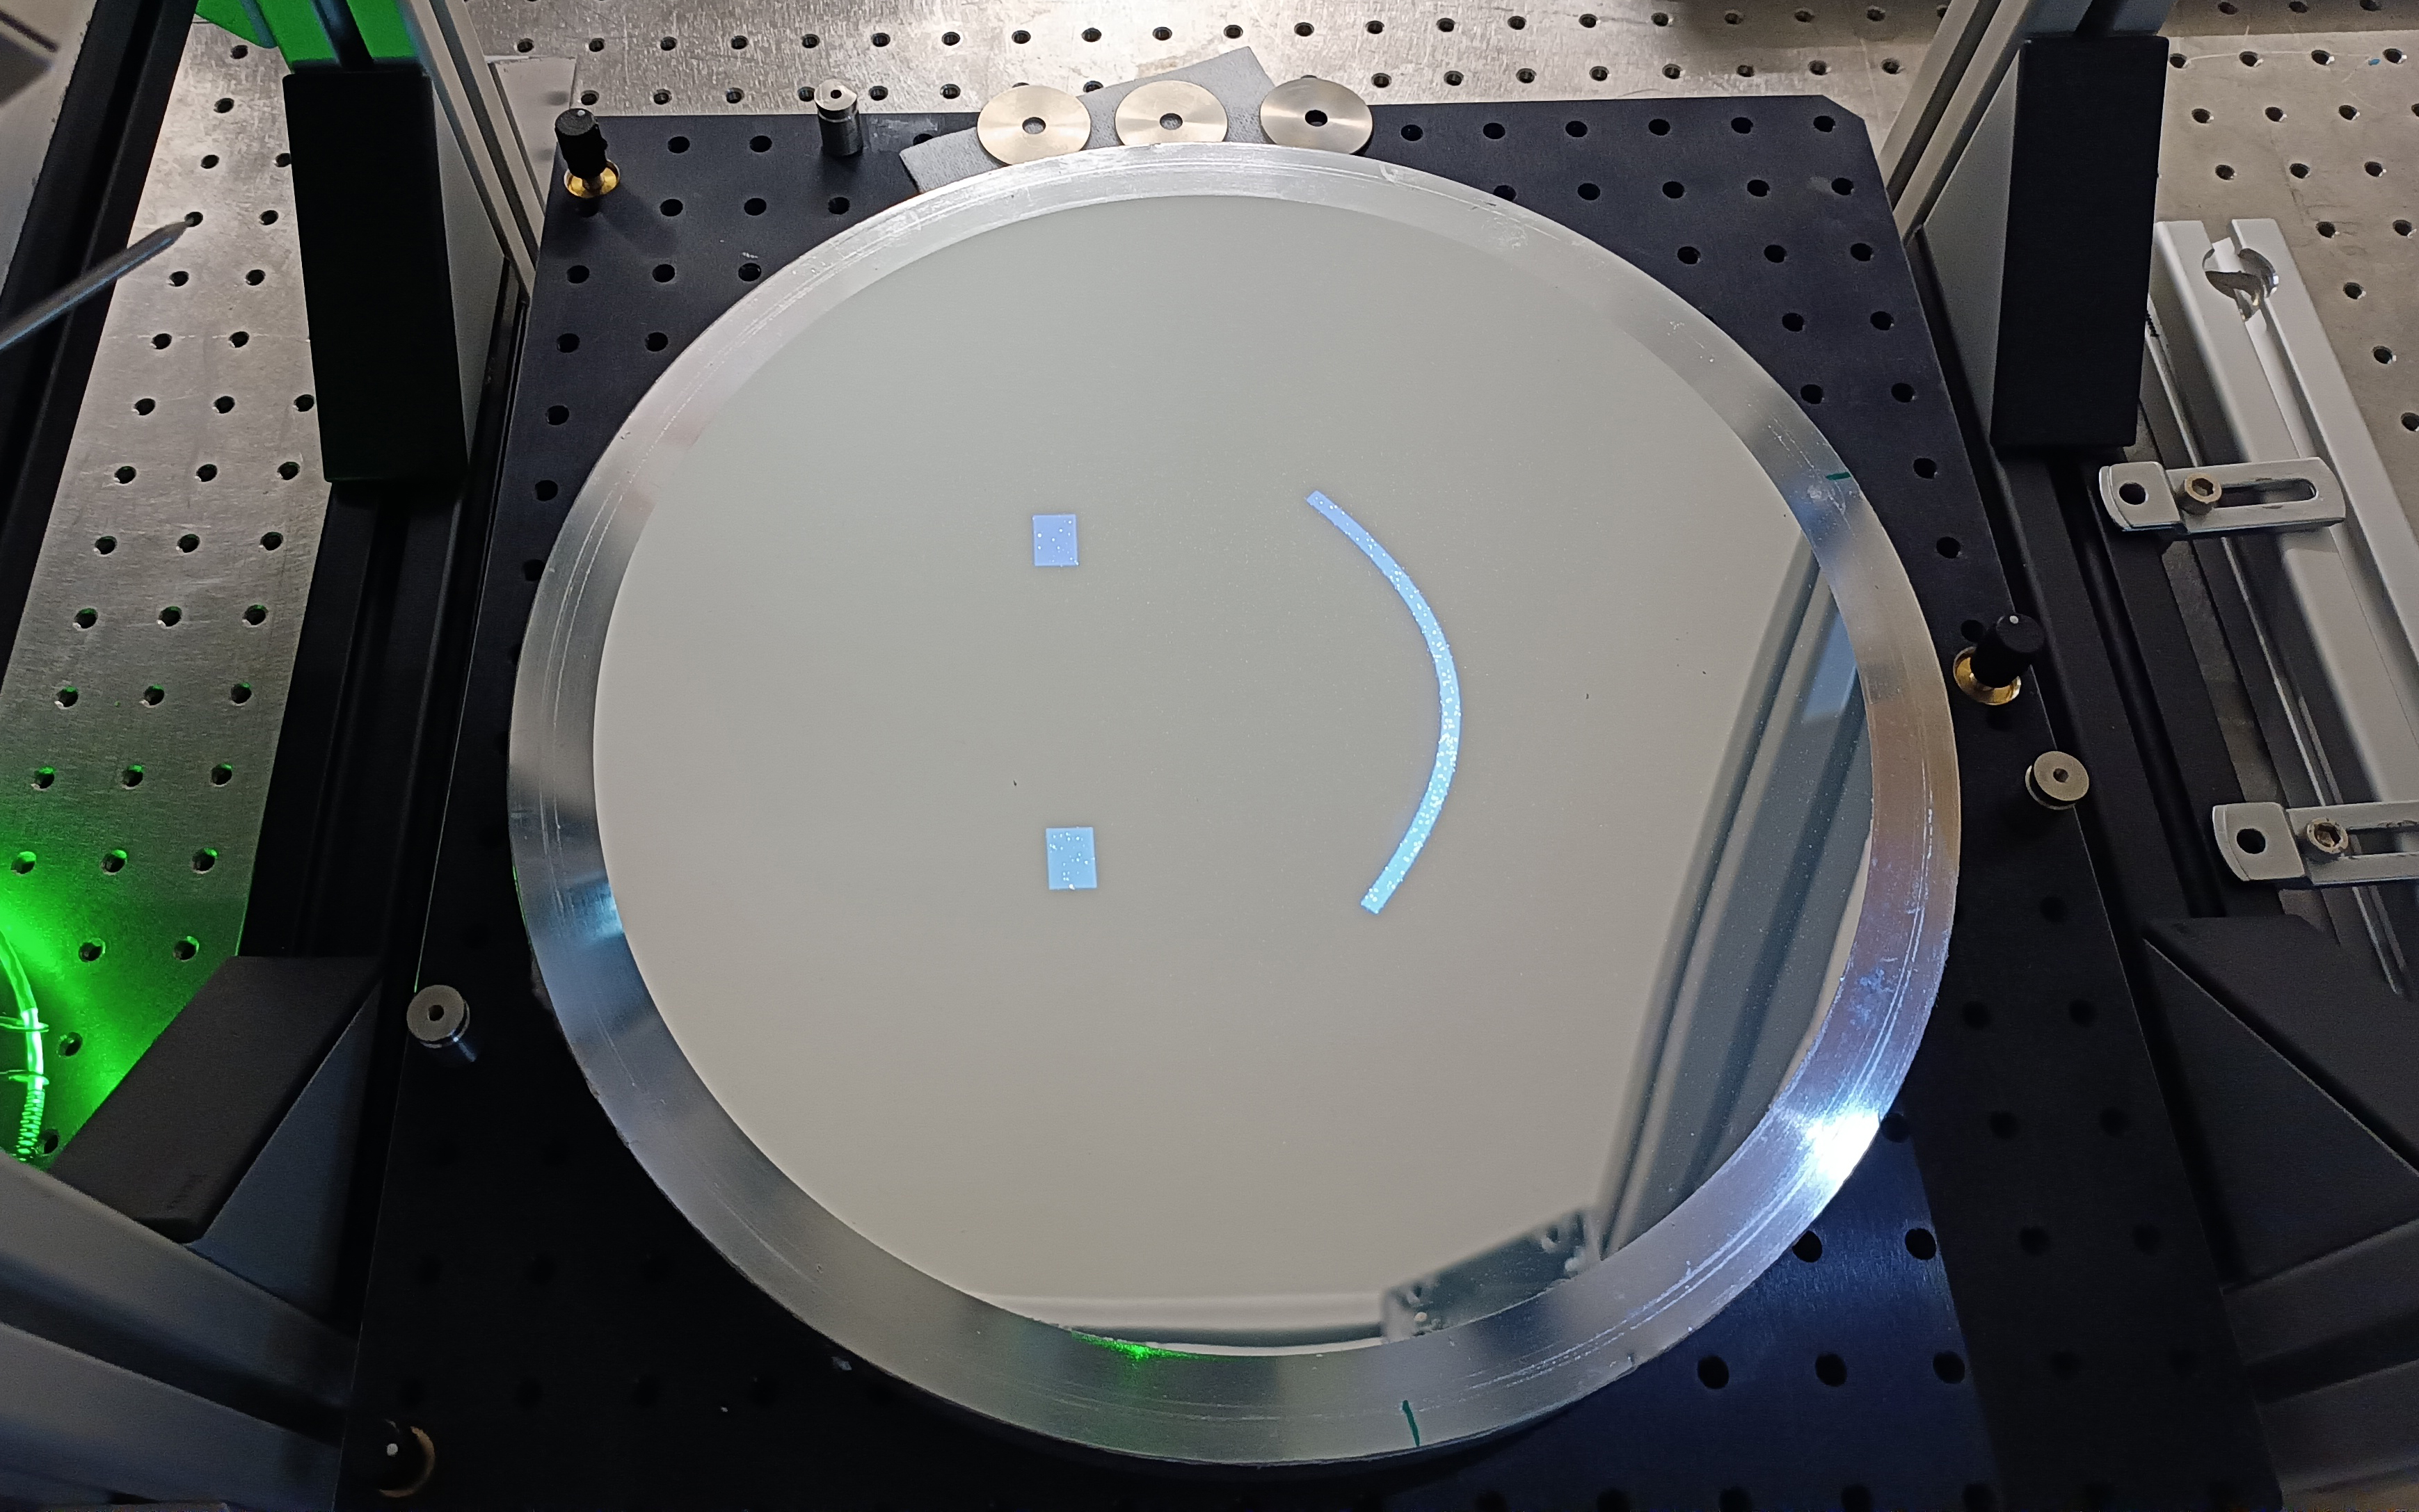 a circular mirror with a smily face illuminated on it